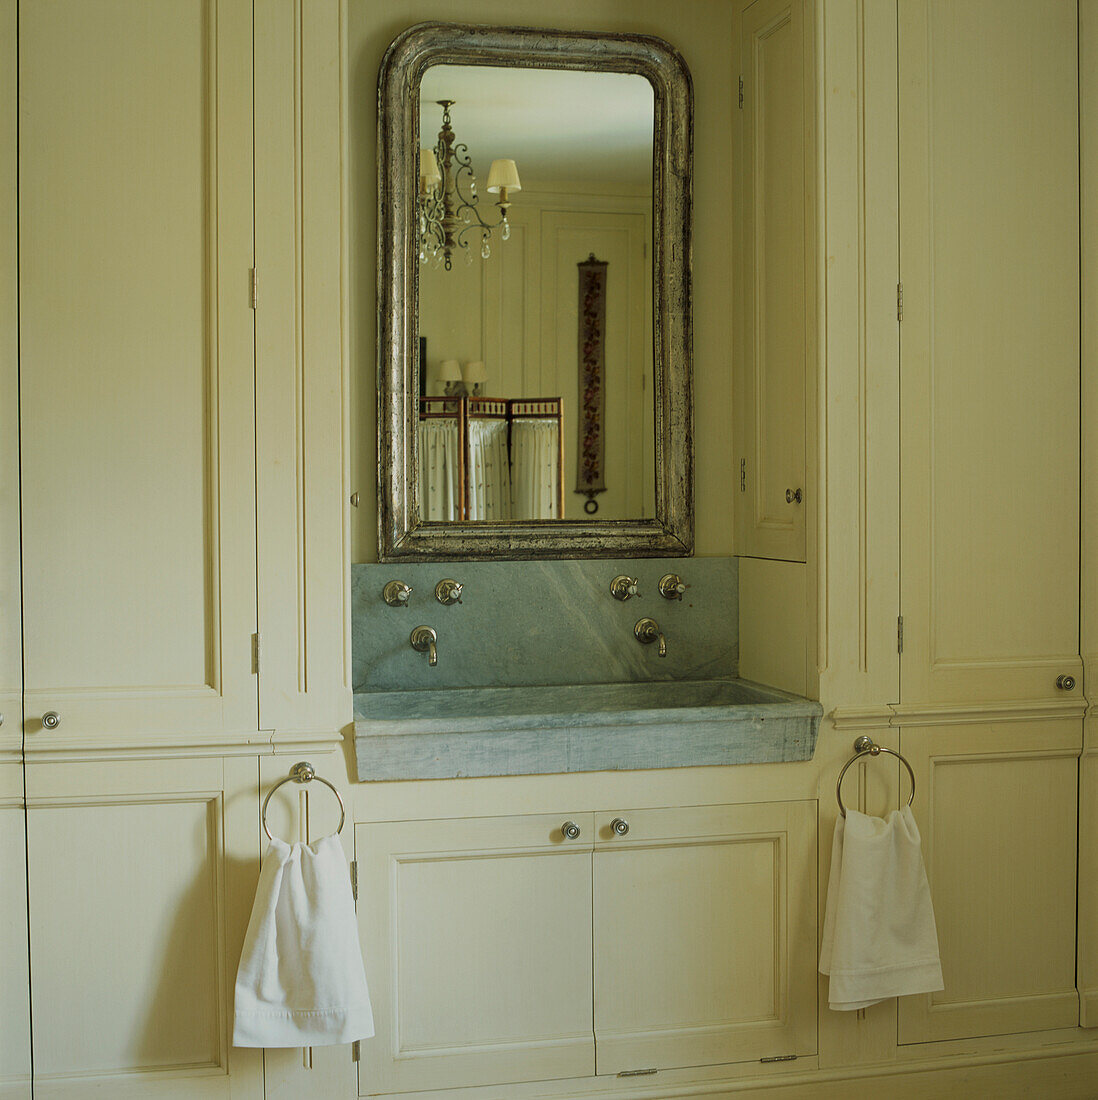 Antique marble basin set in bespoke cabinets with French mirror